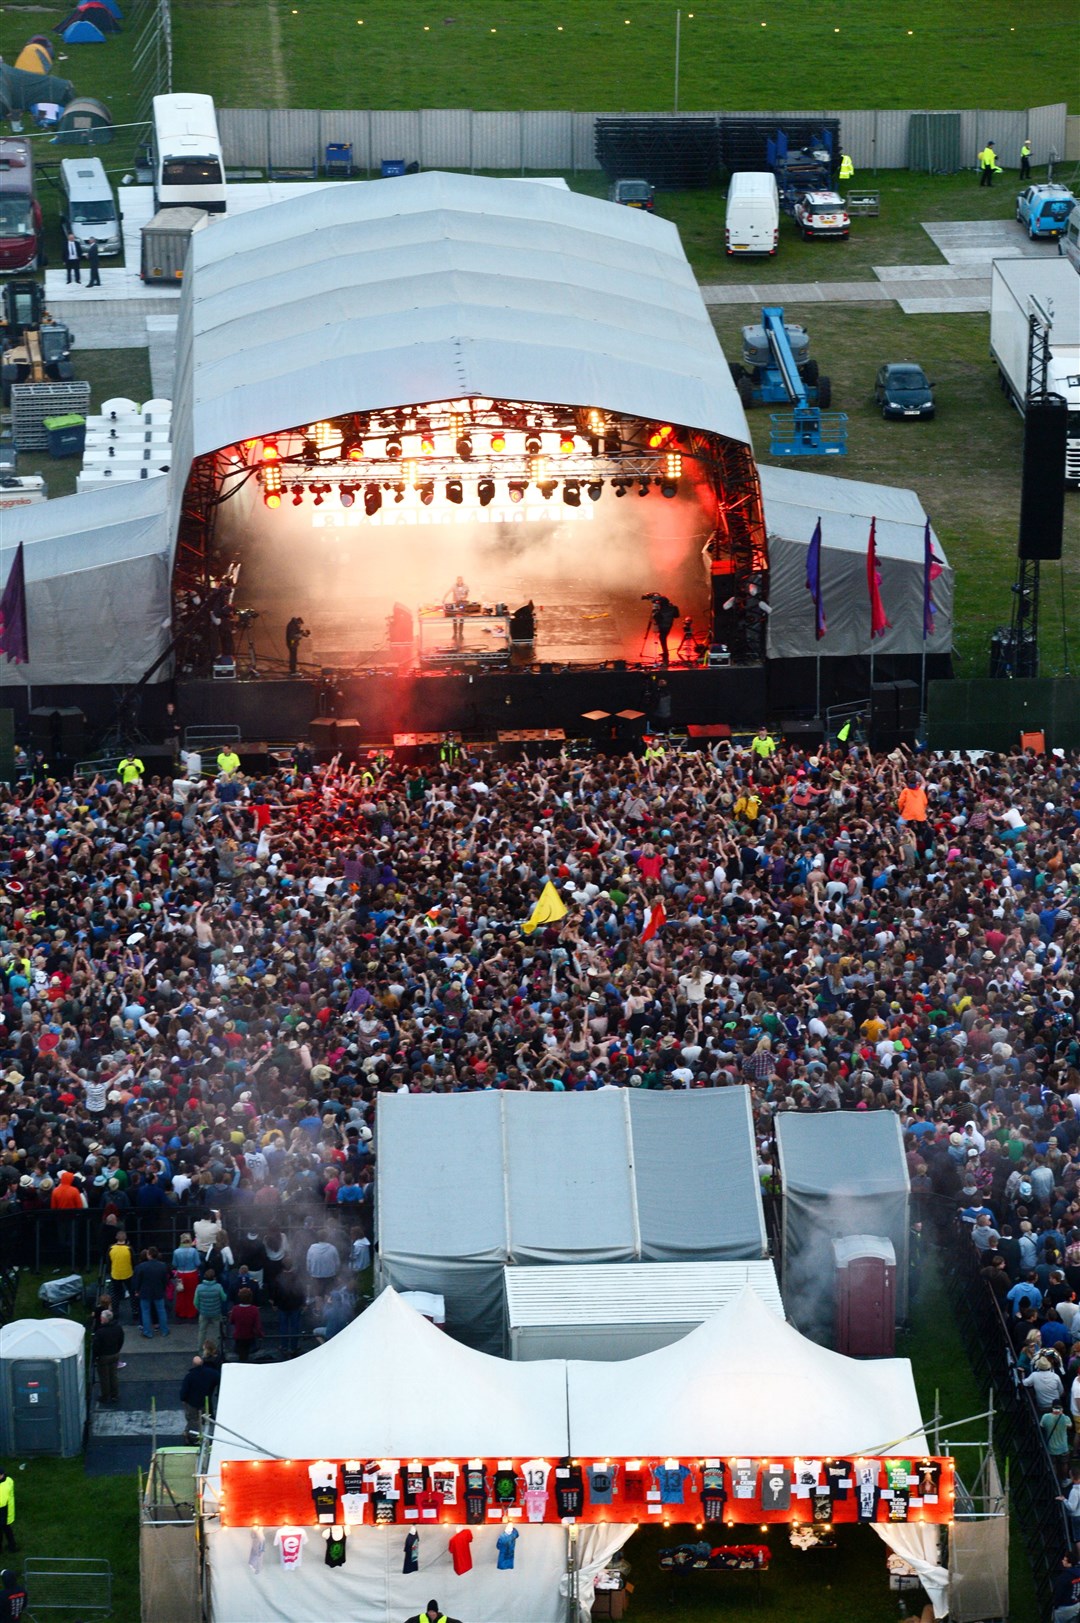 An overview of RockNess 2013 at the main stage for Fatboy Slim. Picture: HNM/ Alasdair Allen